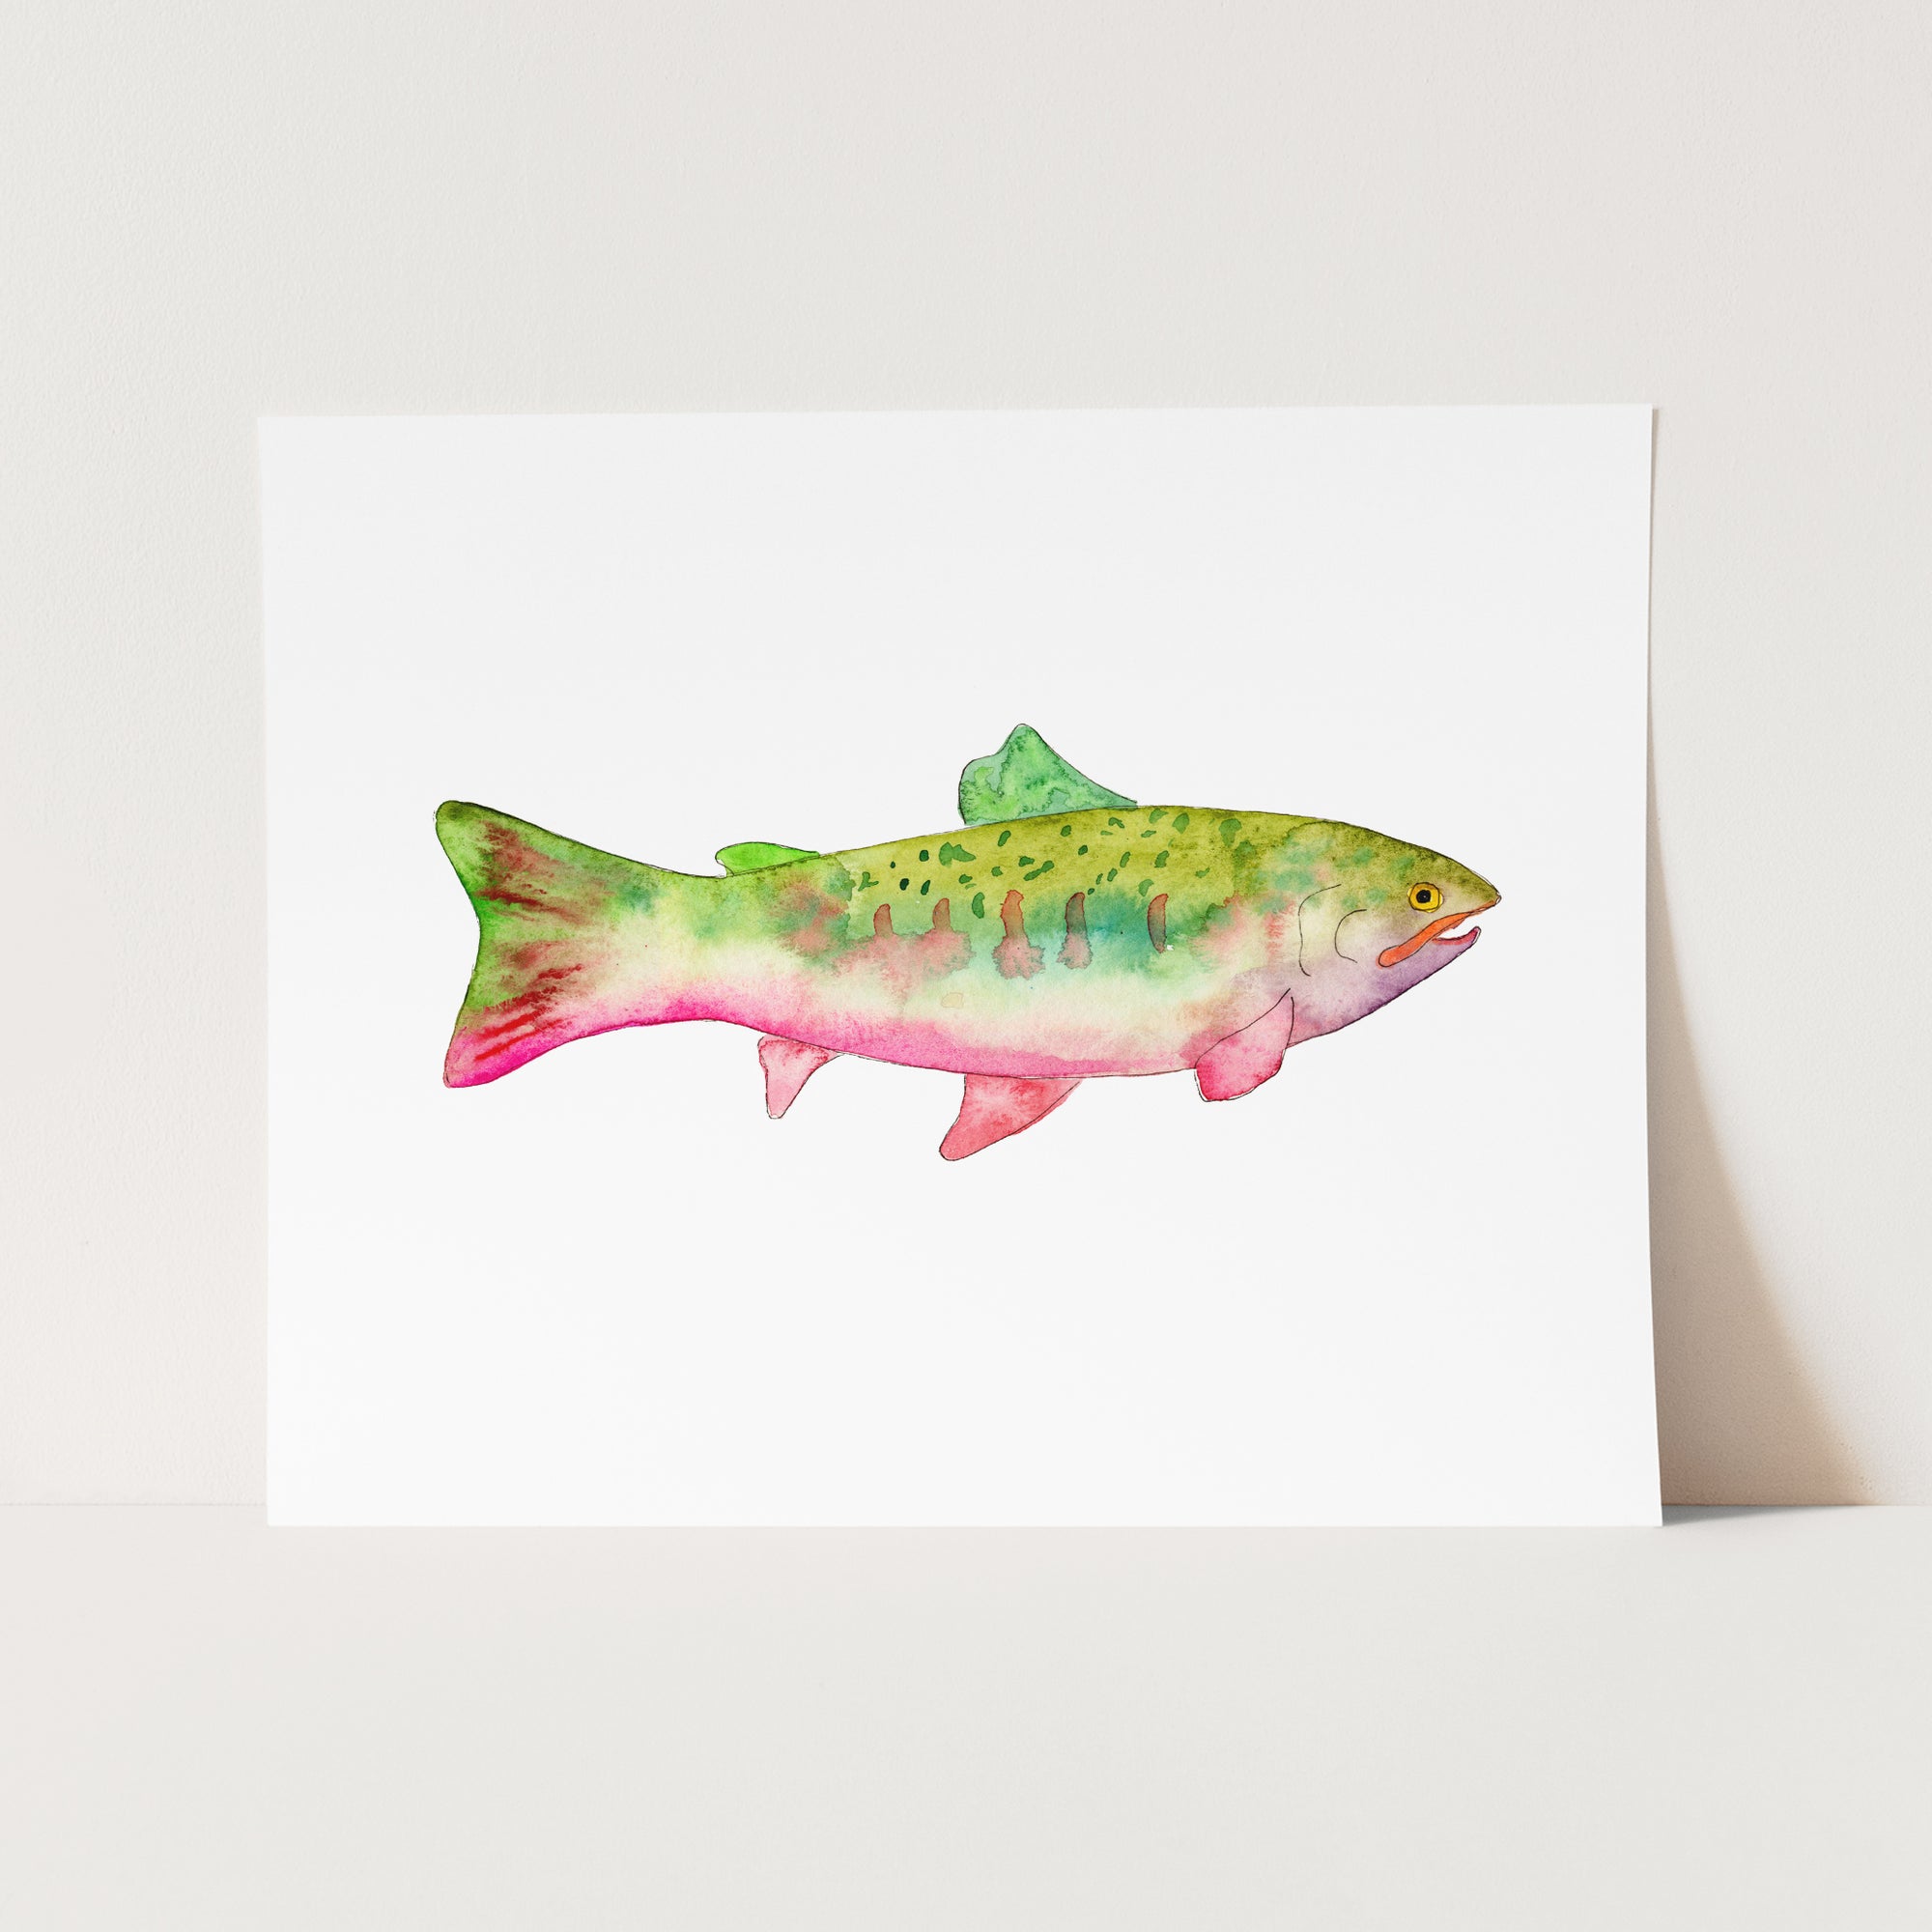 a card with a watercolor painting of a fish